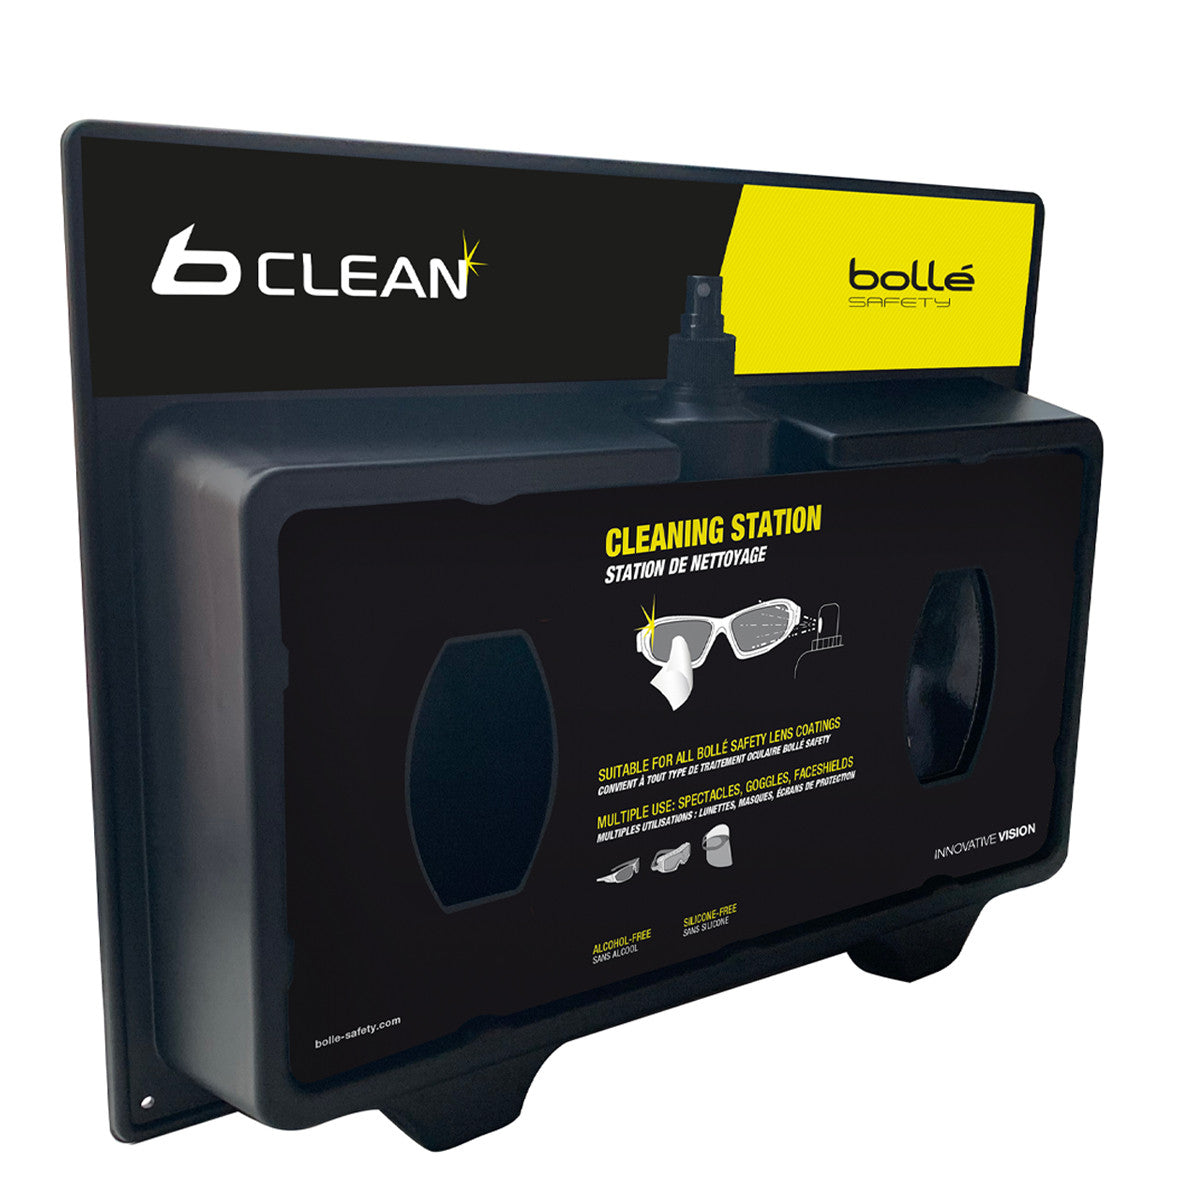 Bollé Safety Plastic Cleaning Station